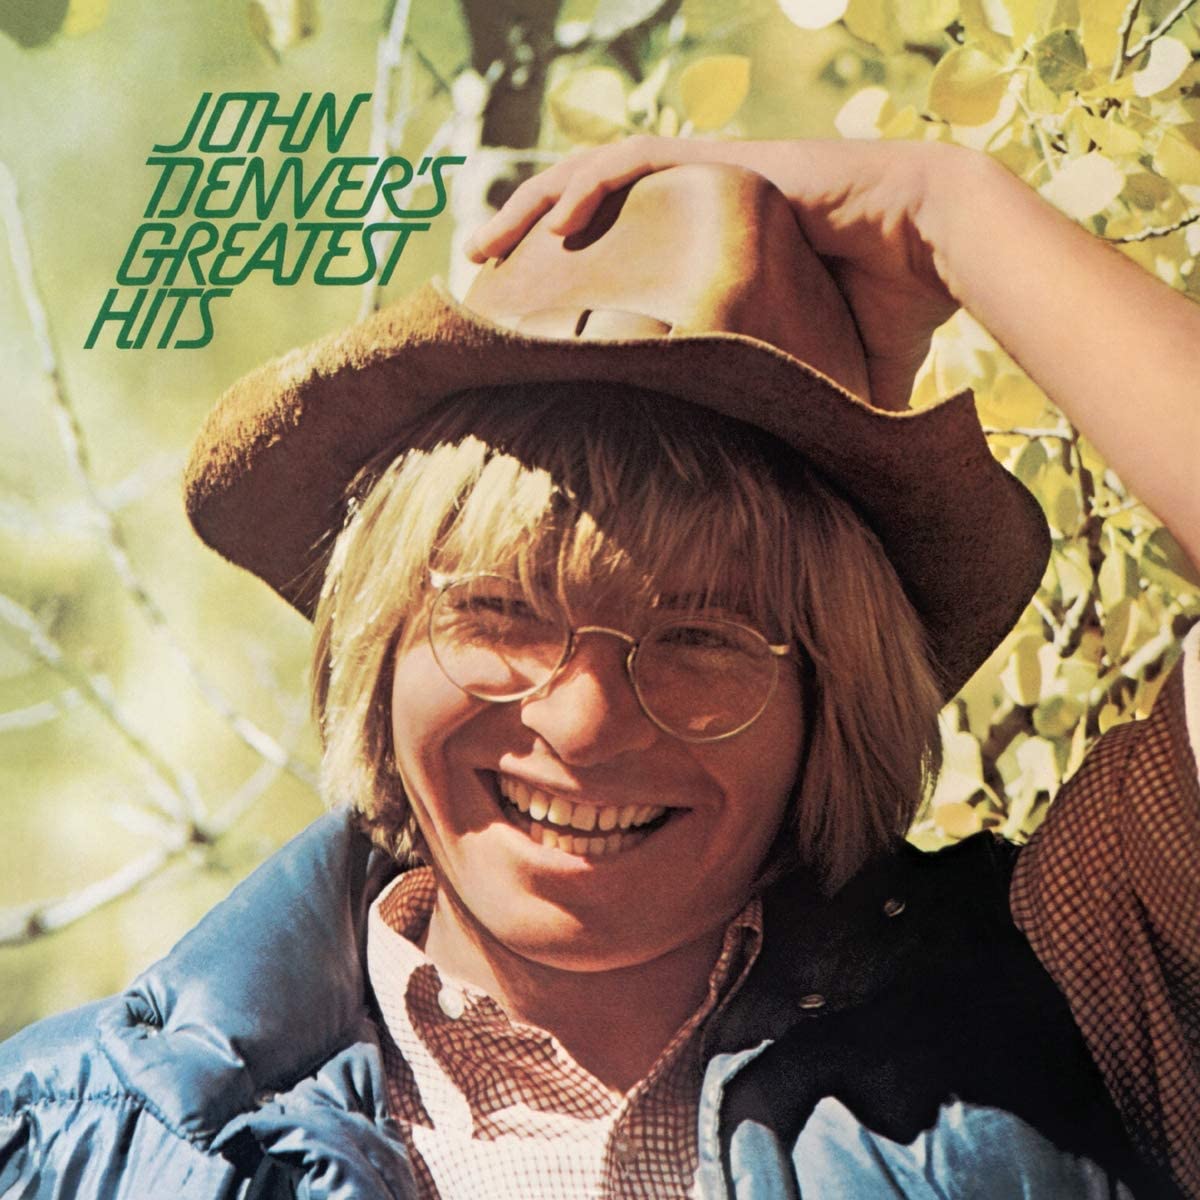 John Denver's Greatest Hits (Used) (Mint Condition)